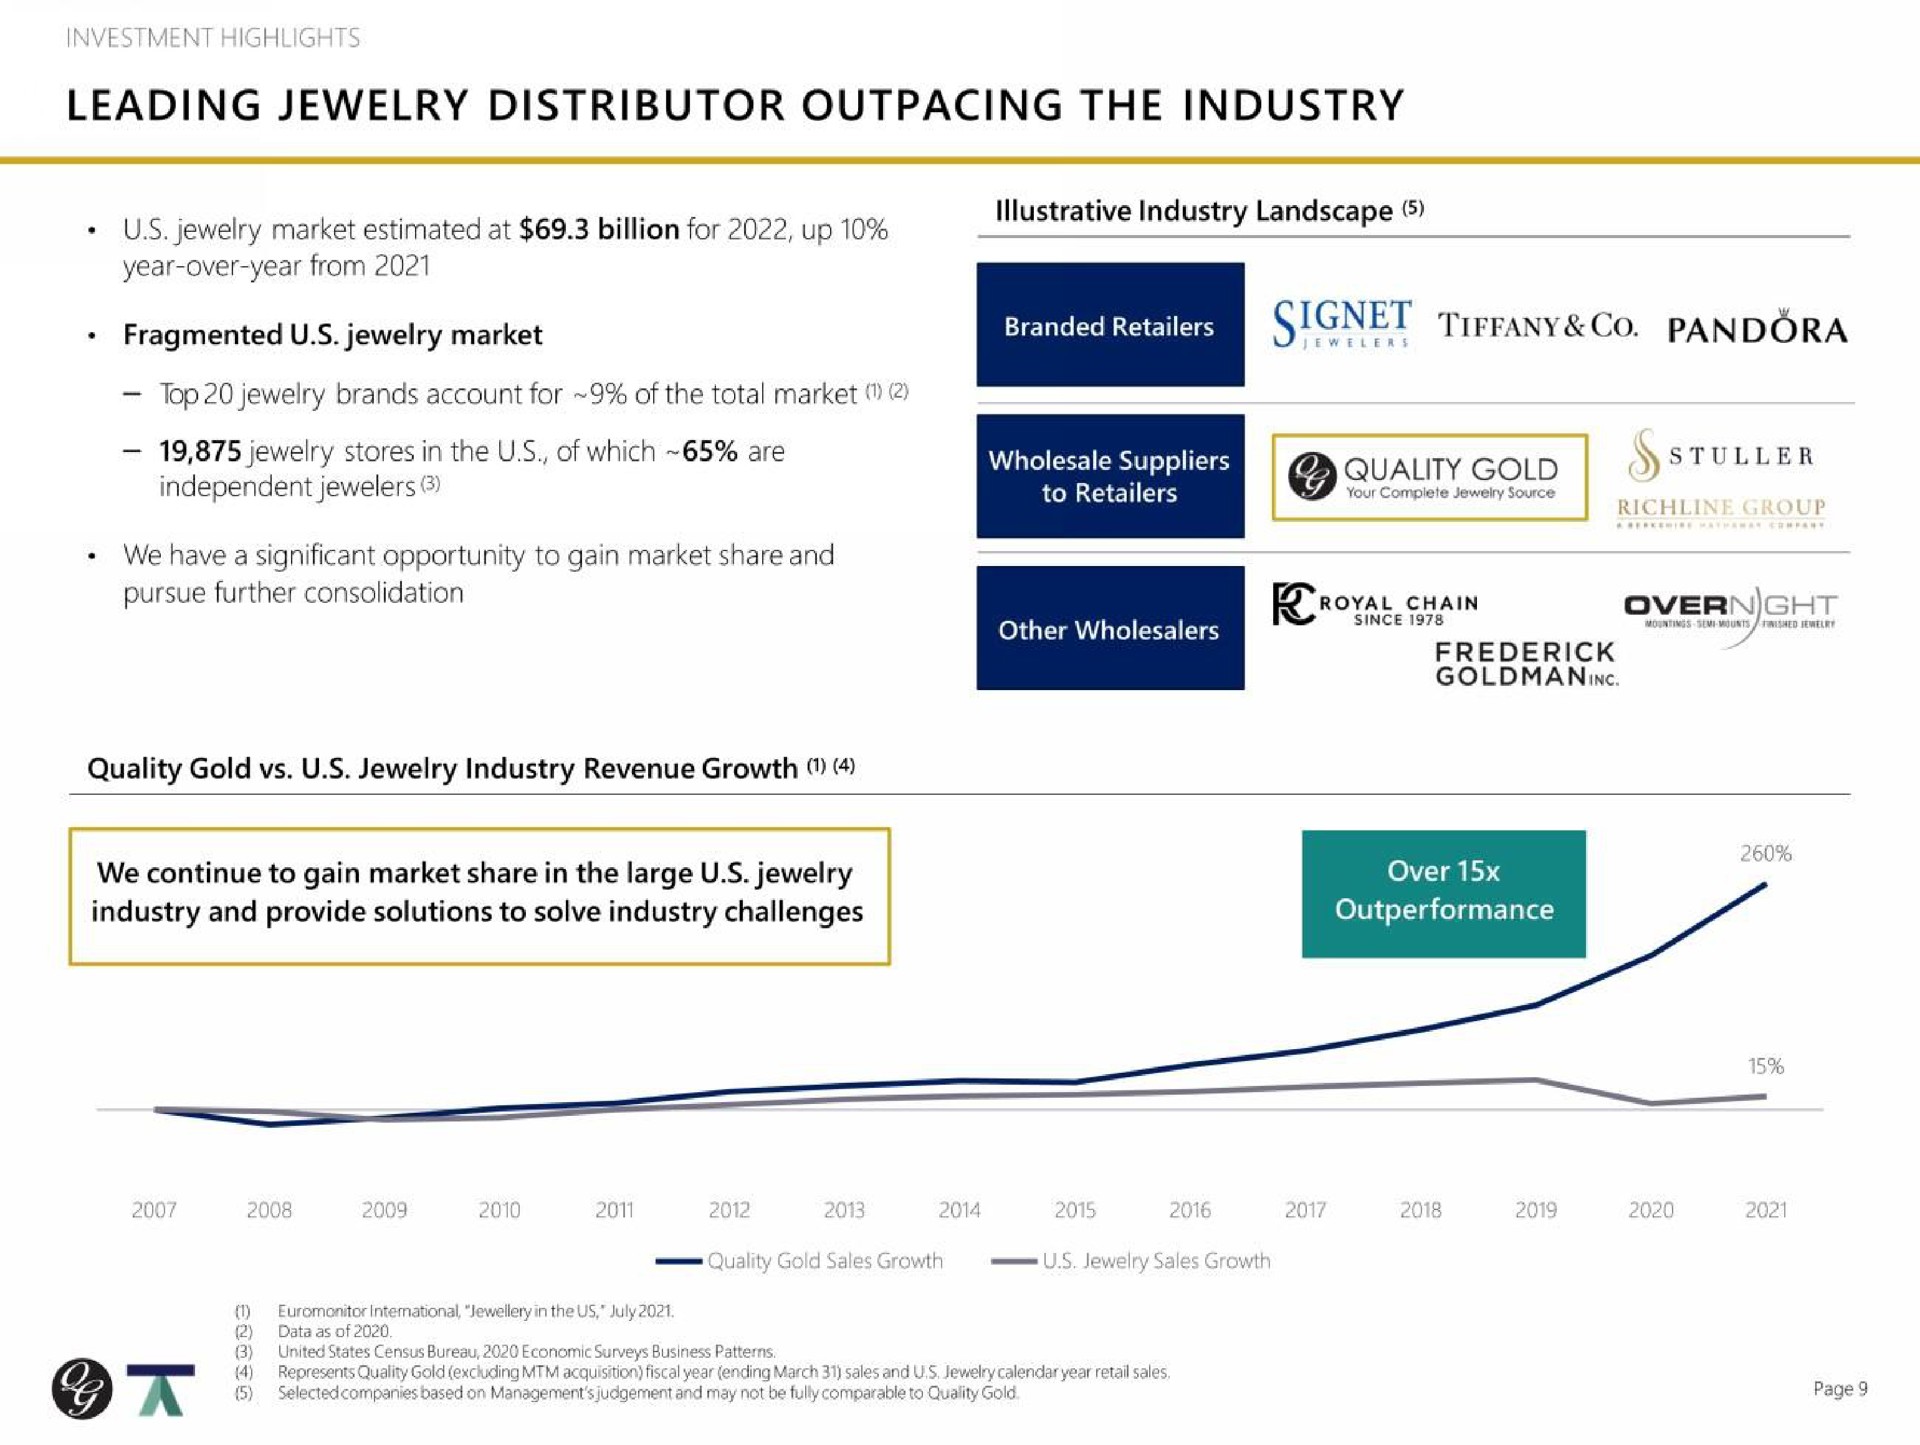 leading jewelry distributor outpacing the industry branded retailers signet tiffany pandora overnight | Quality Gold